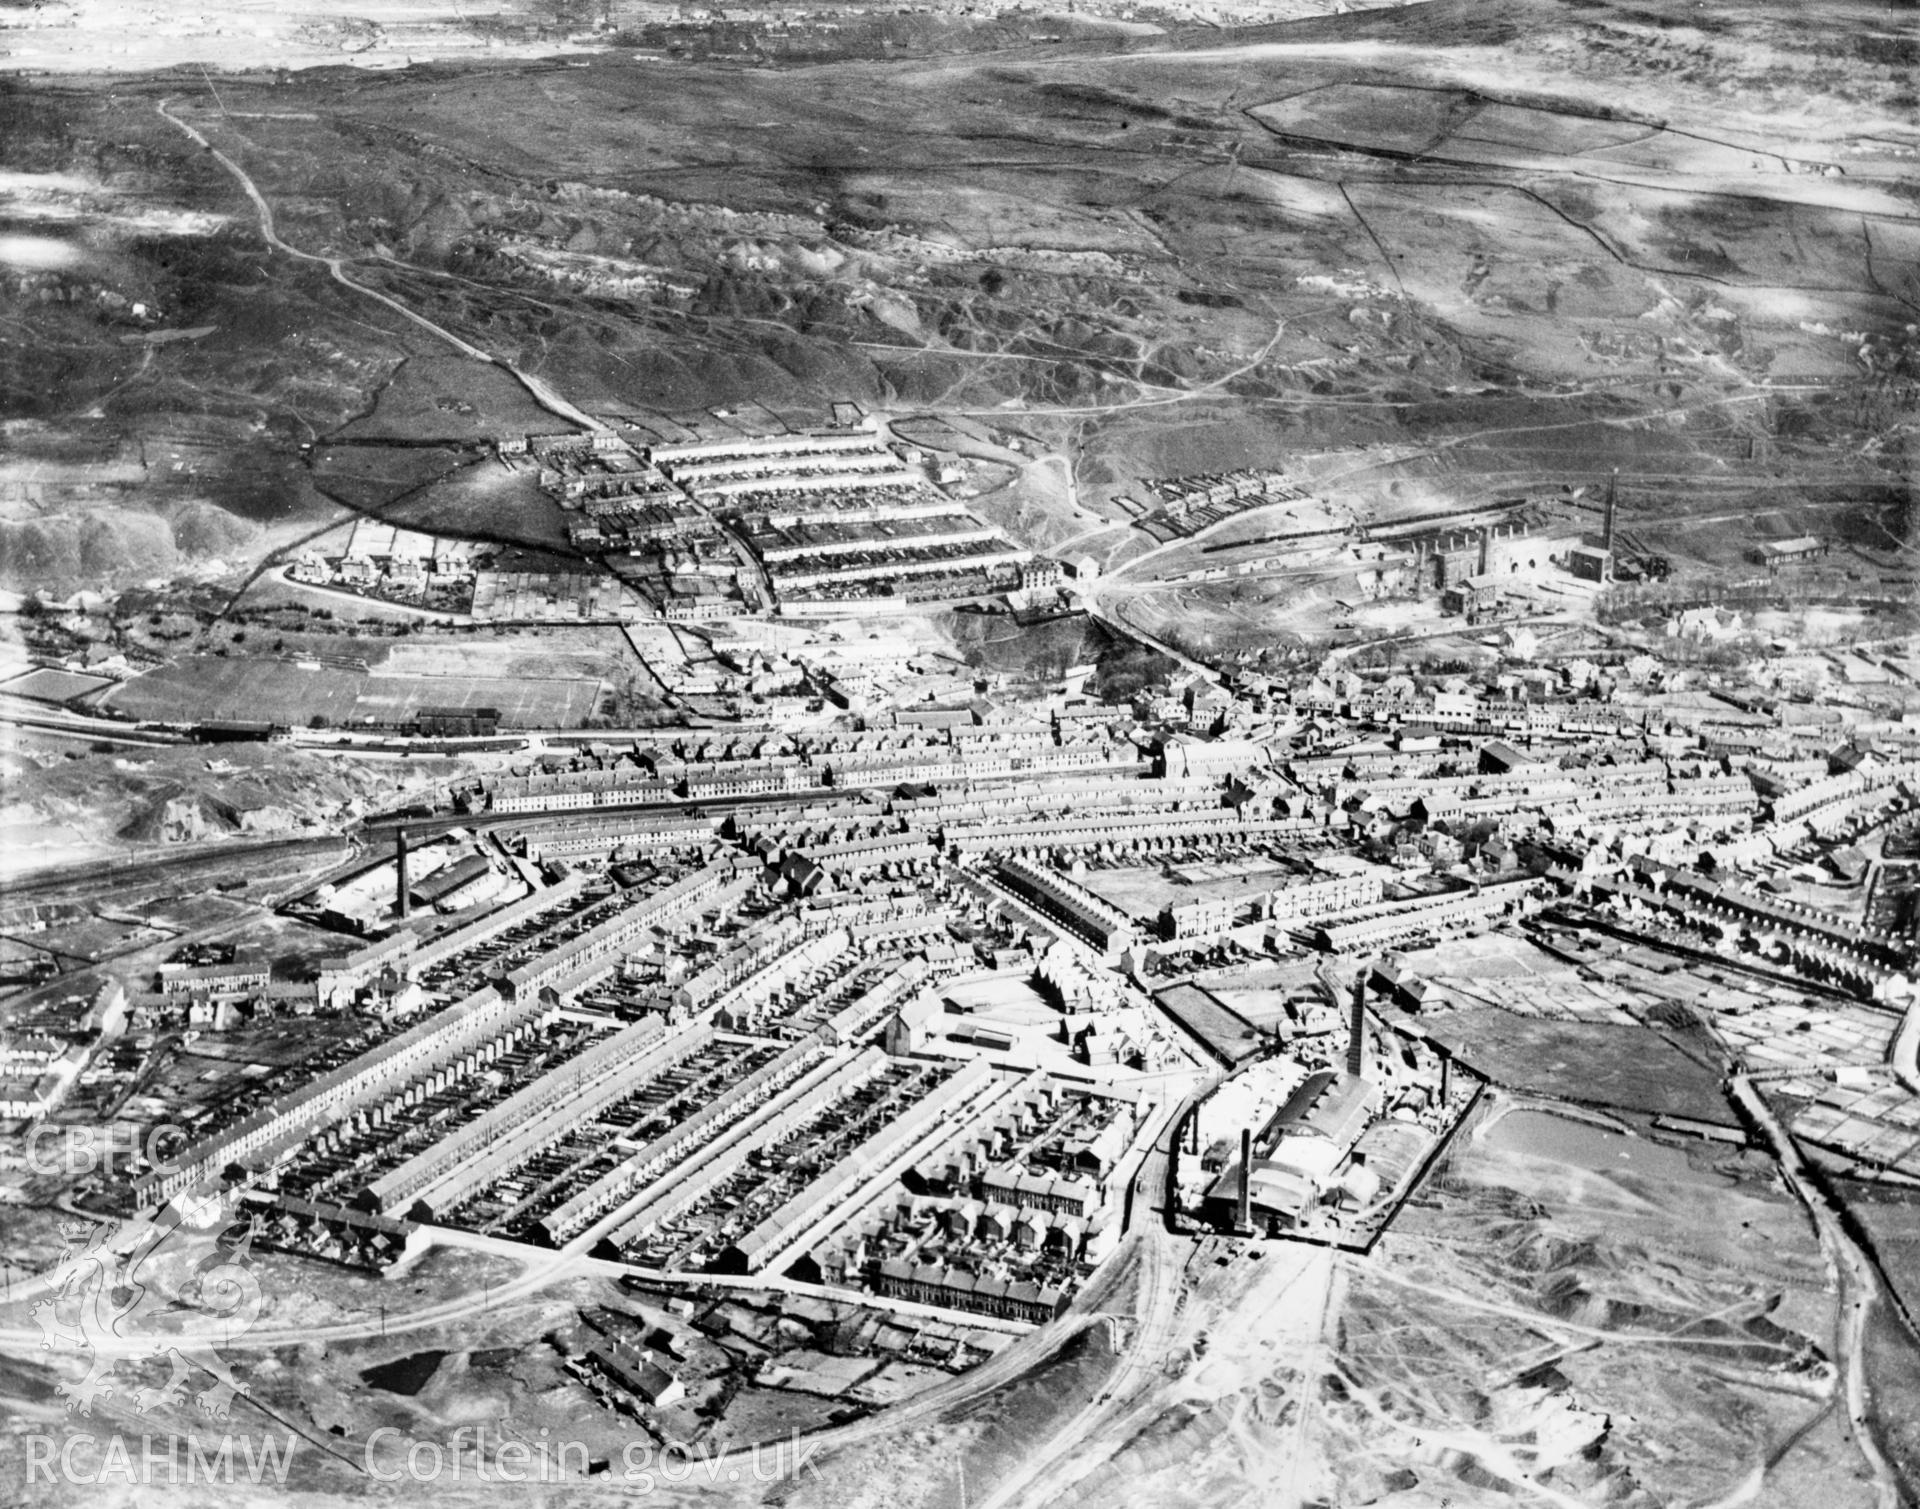 General view of Ebbw Vale showing steelworks, commissioned by R. Thomas & Co.. Oblique aerial photograph, 5?x4? BW glass plate.